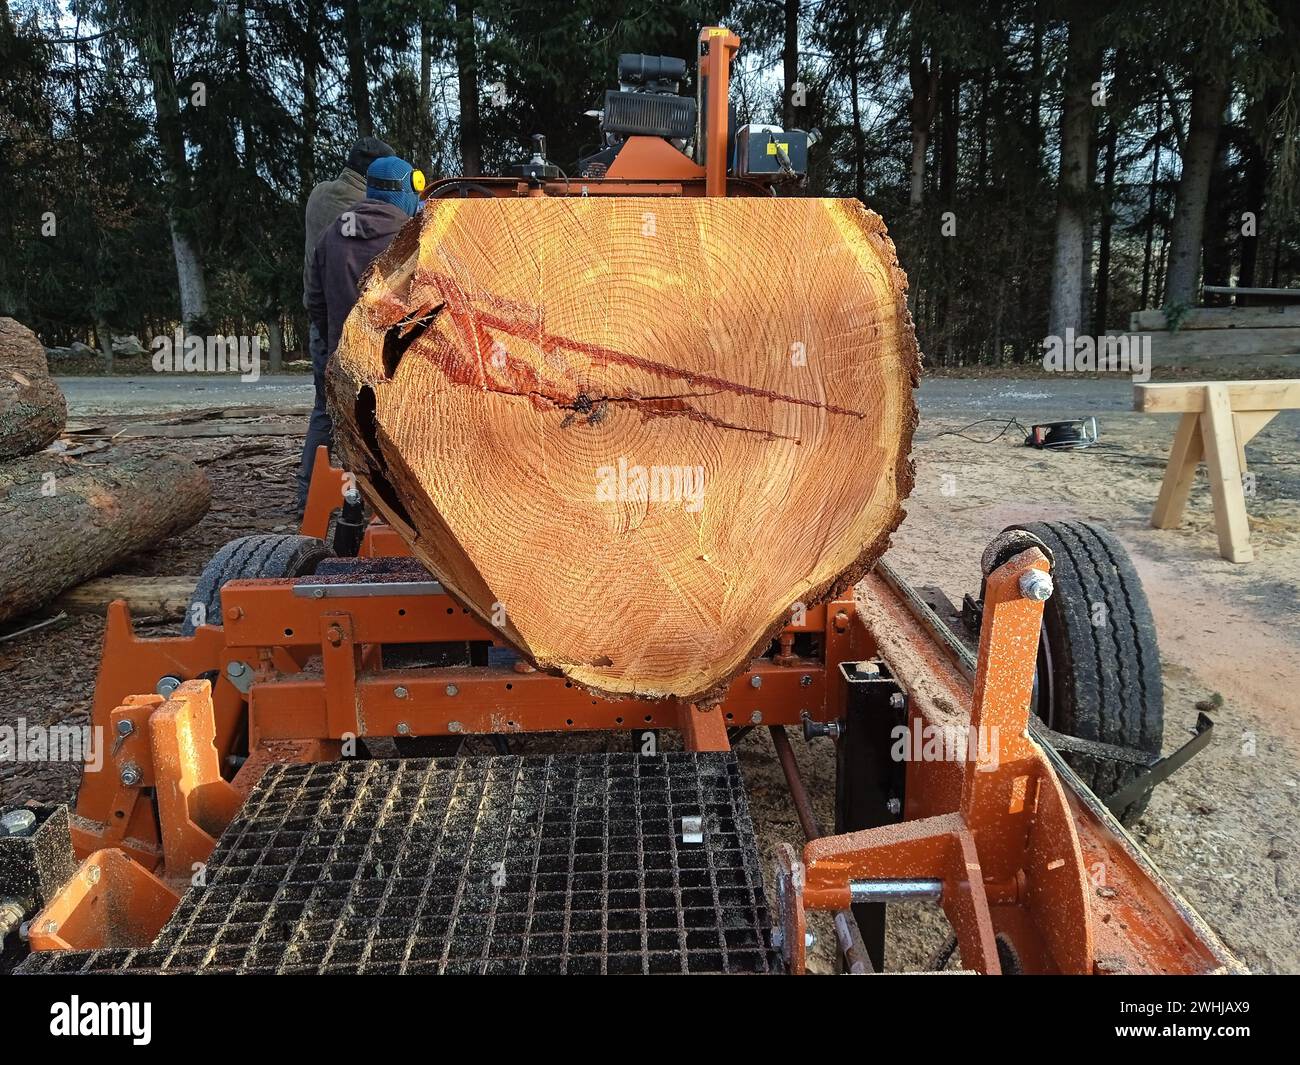 Mobile sawmill in the wood industry Stock Photo